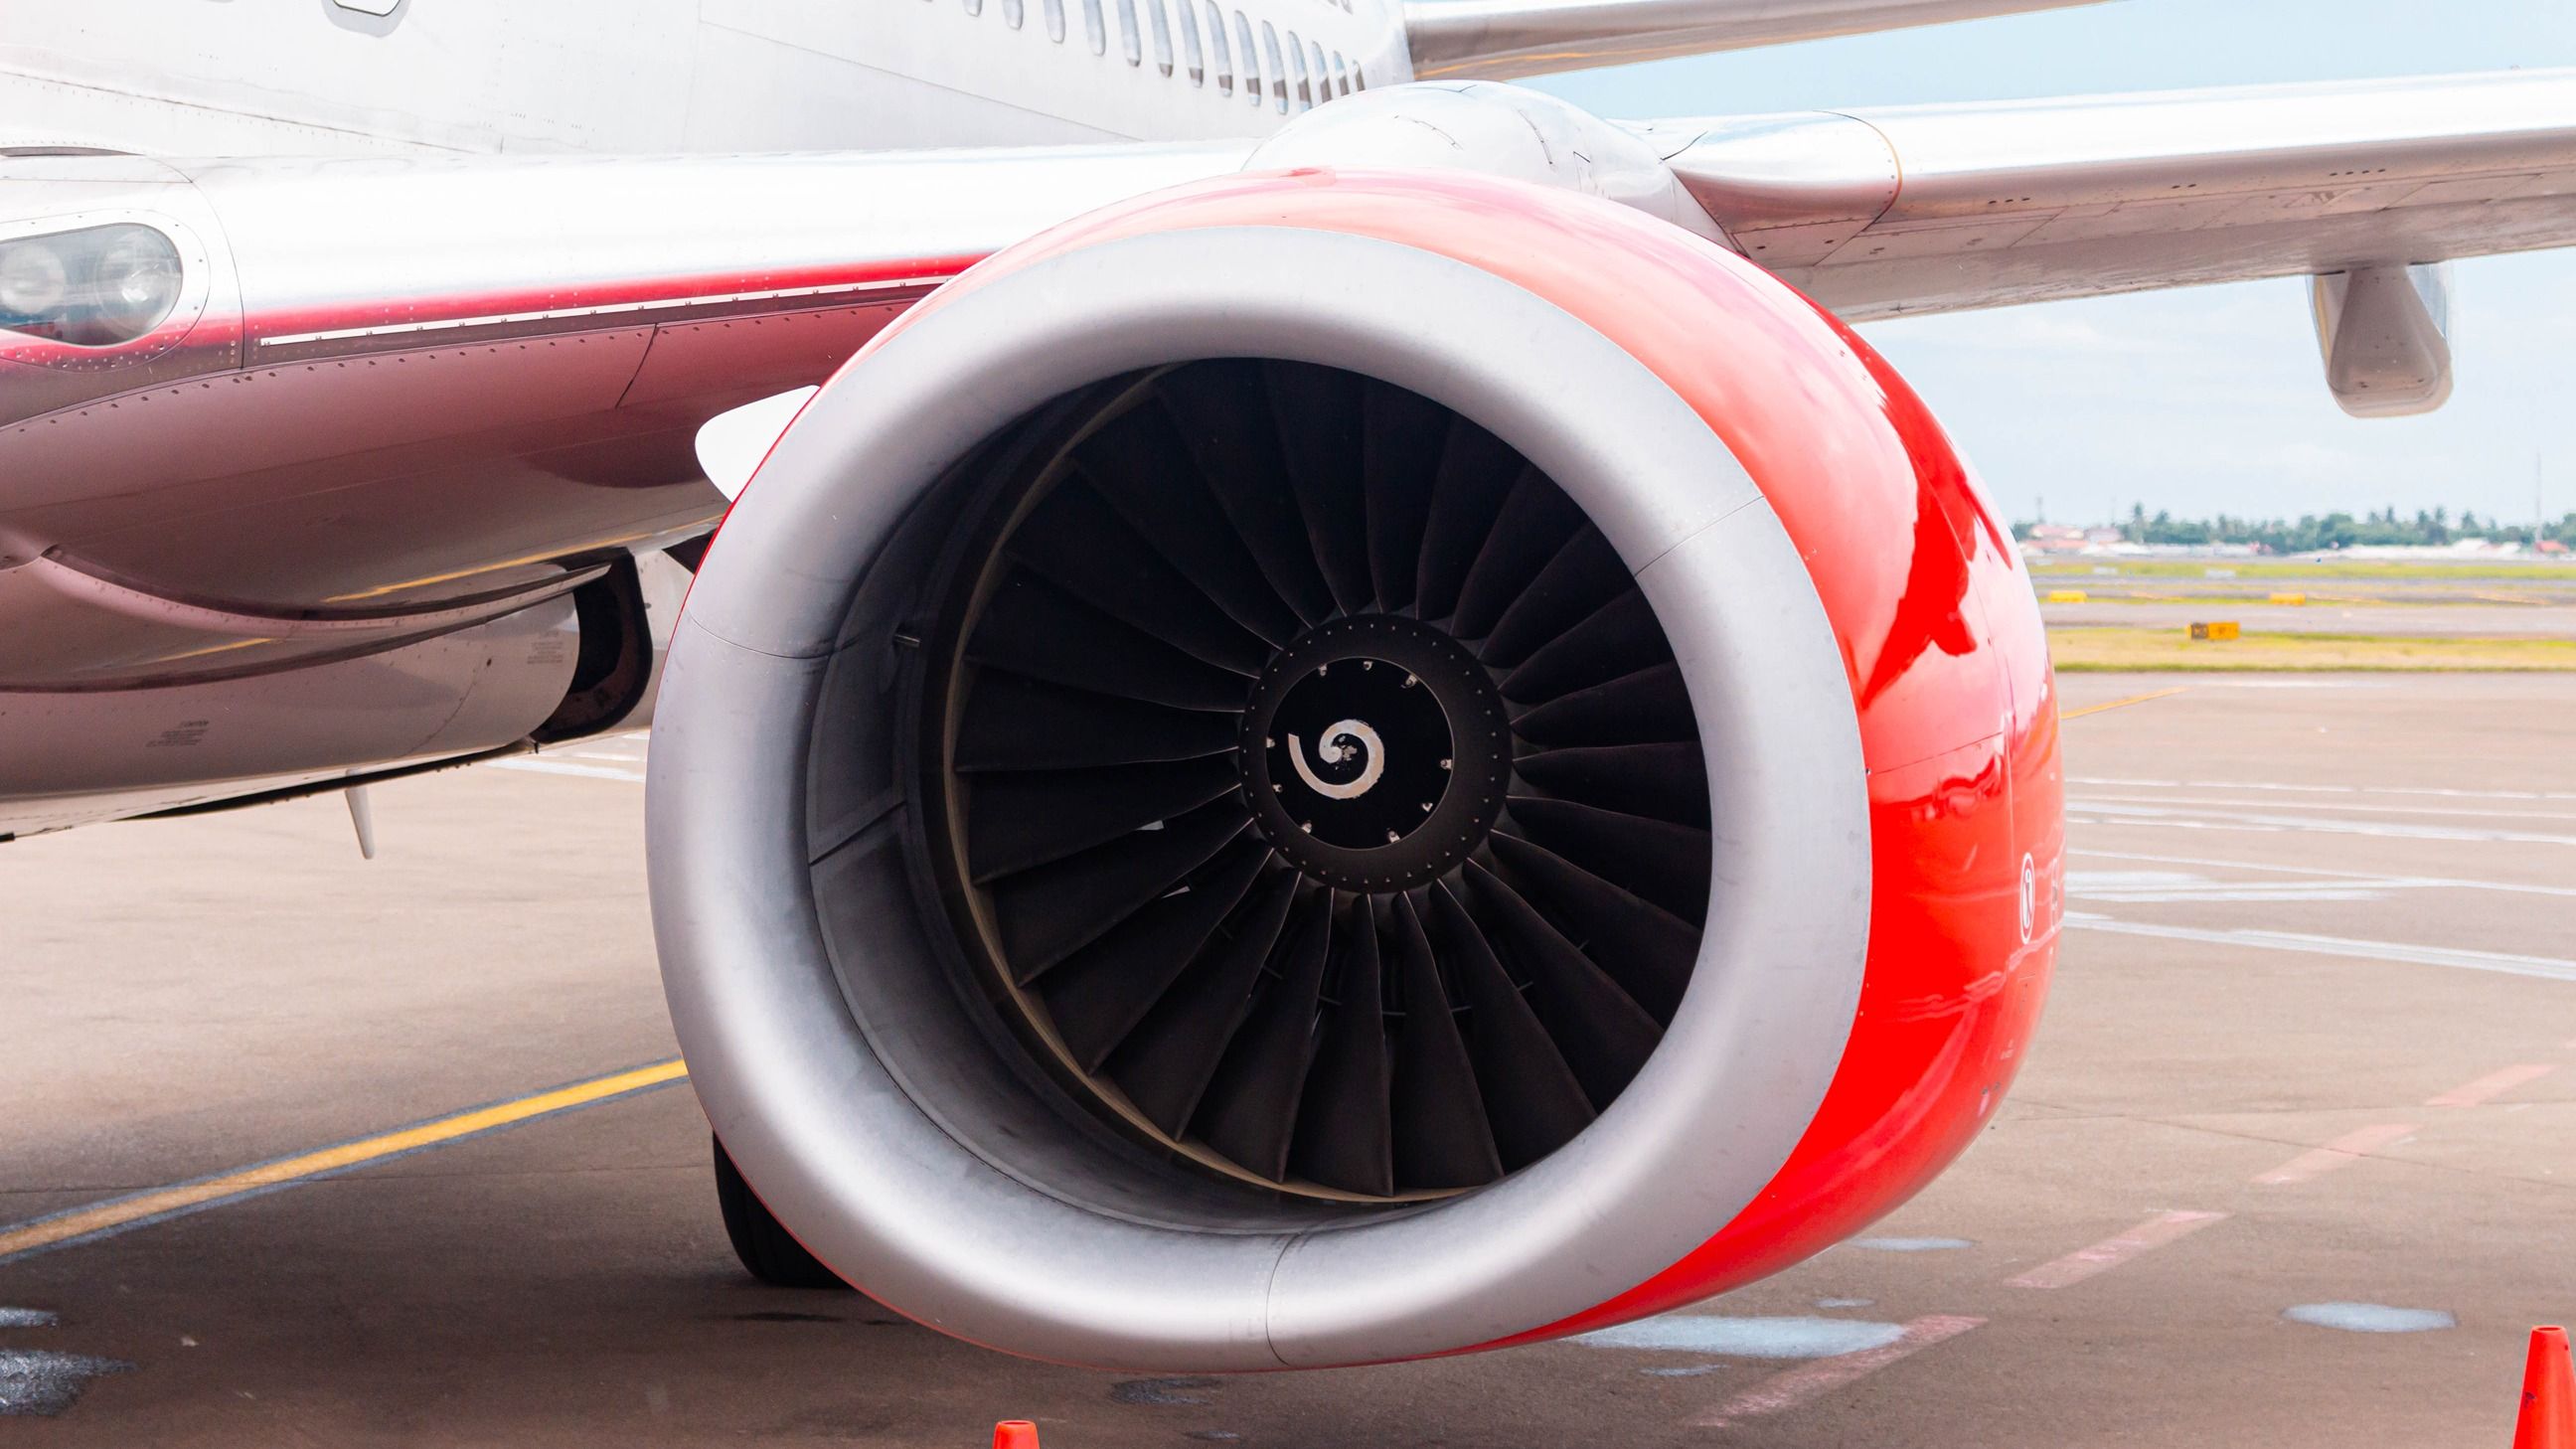 How Many Engines Do Airliners Go Through In A Typical Lifespan?